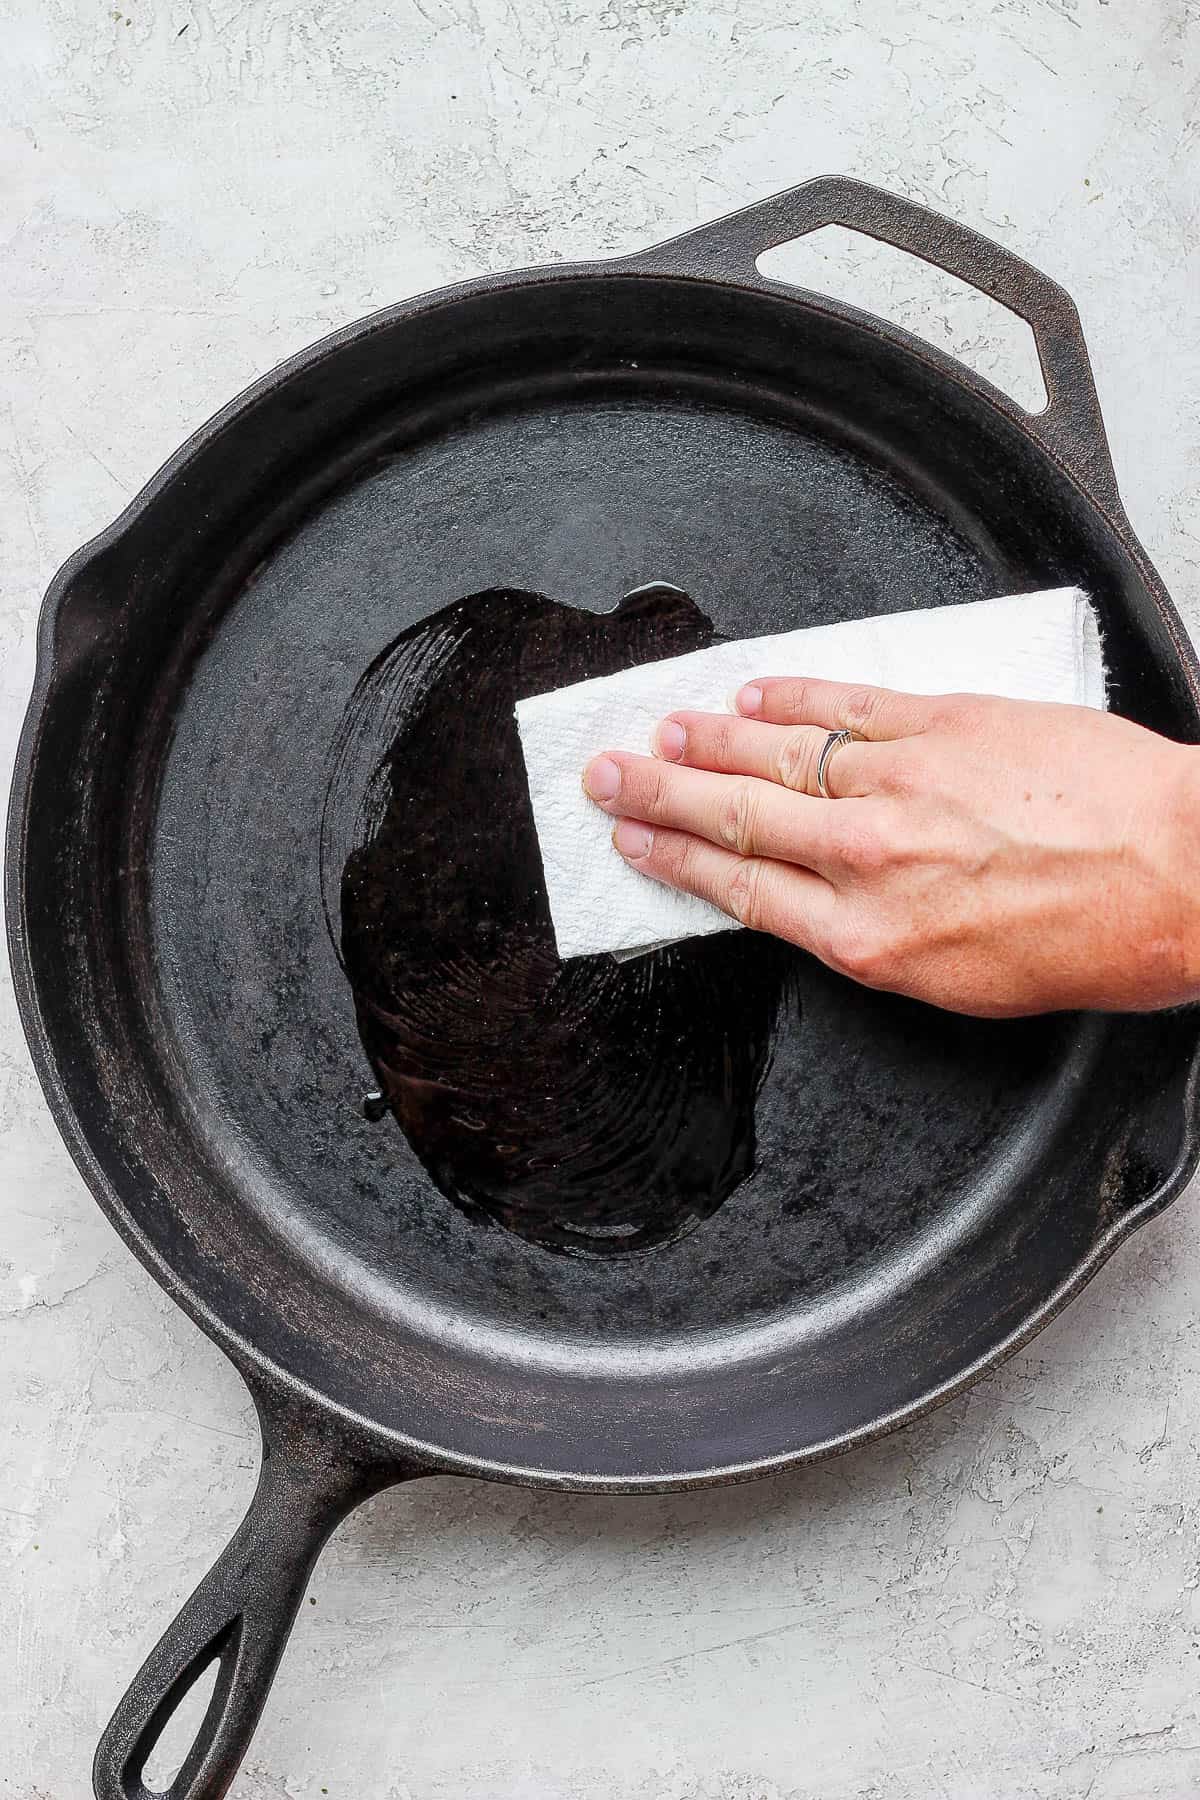 Oil being applied to a cast iron skillet.